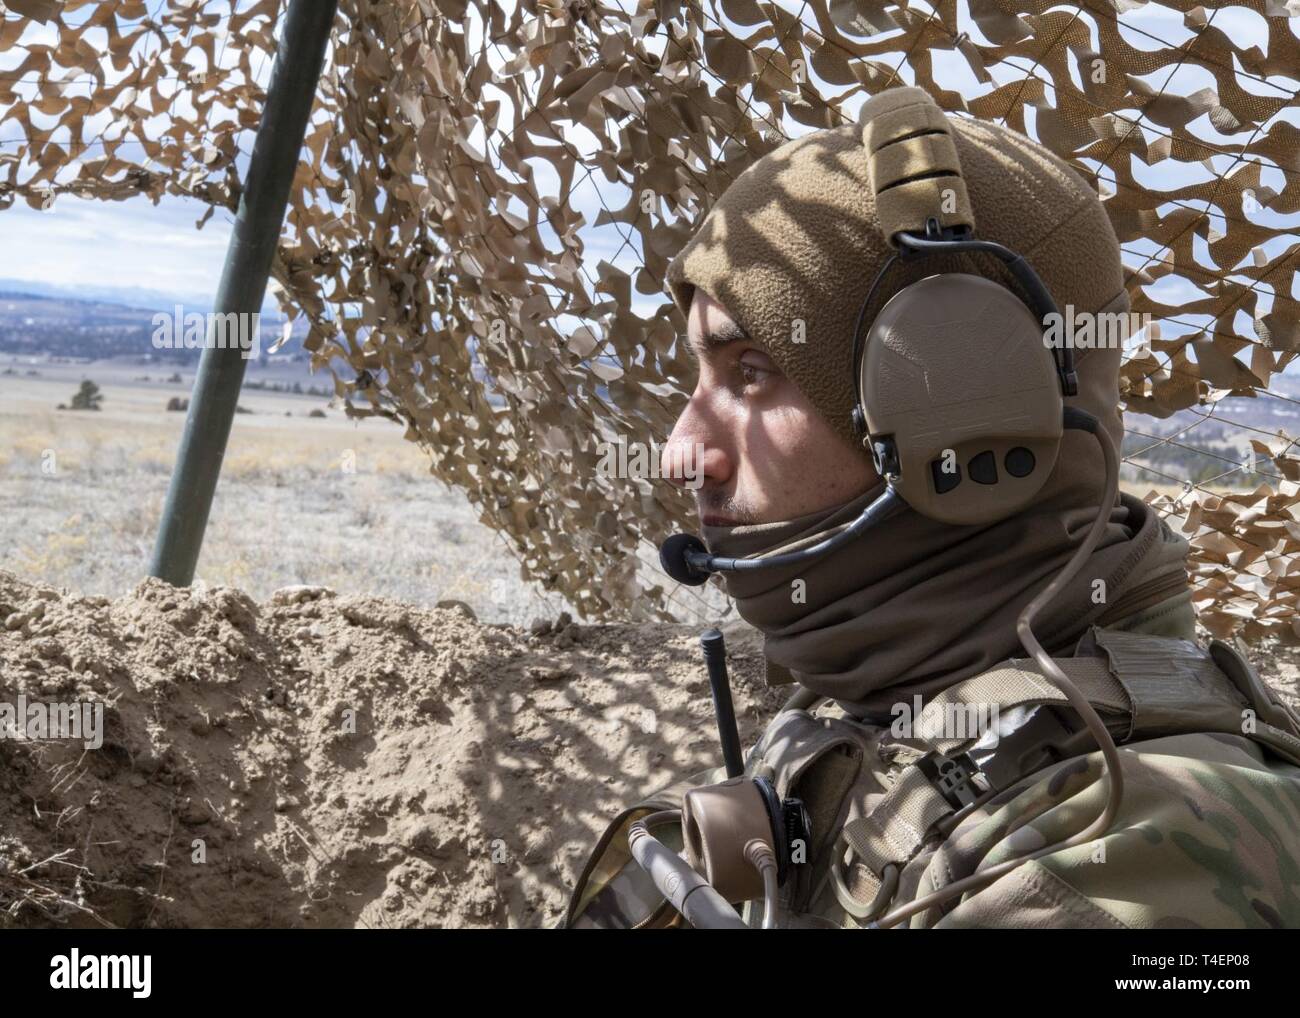 Airman 1st Class Timothy Jansen, 823d Base Defense Squadron (BDS) fire team member, keeps watch from his defensive fighting position during the Mission Readiness Exercise (MRX) at Camp Guernsey, Wyo., March 25, 2019. Throughout the MRX the 823d BDS practiced adaptive basing in support of National Defense Strategy objectives. Stock Photo